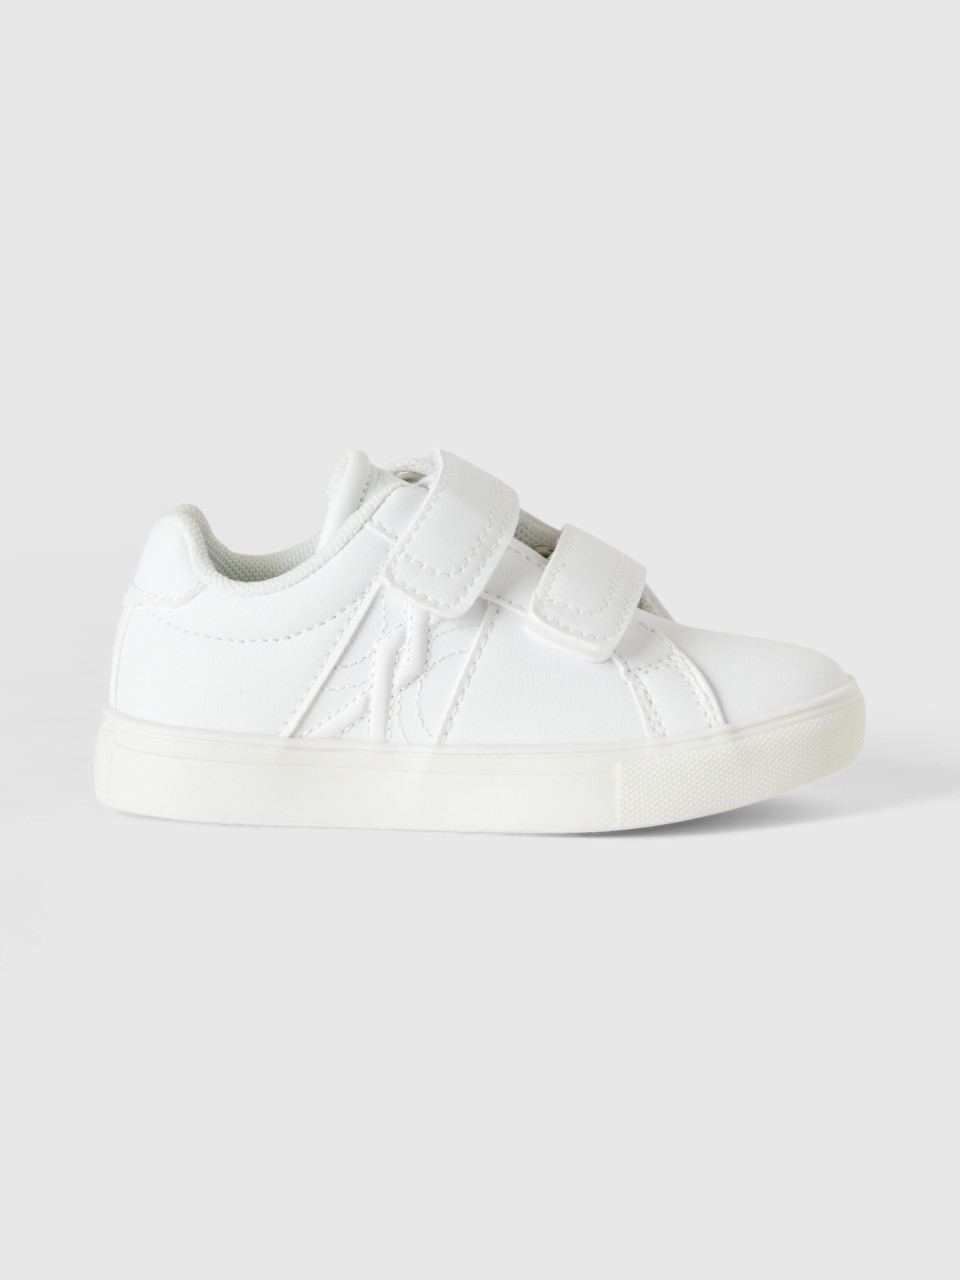 Benetton, Low-top Sneakers With Logo, White, Kids